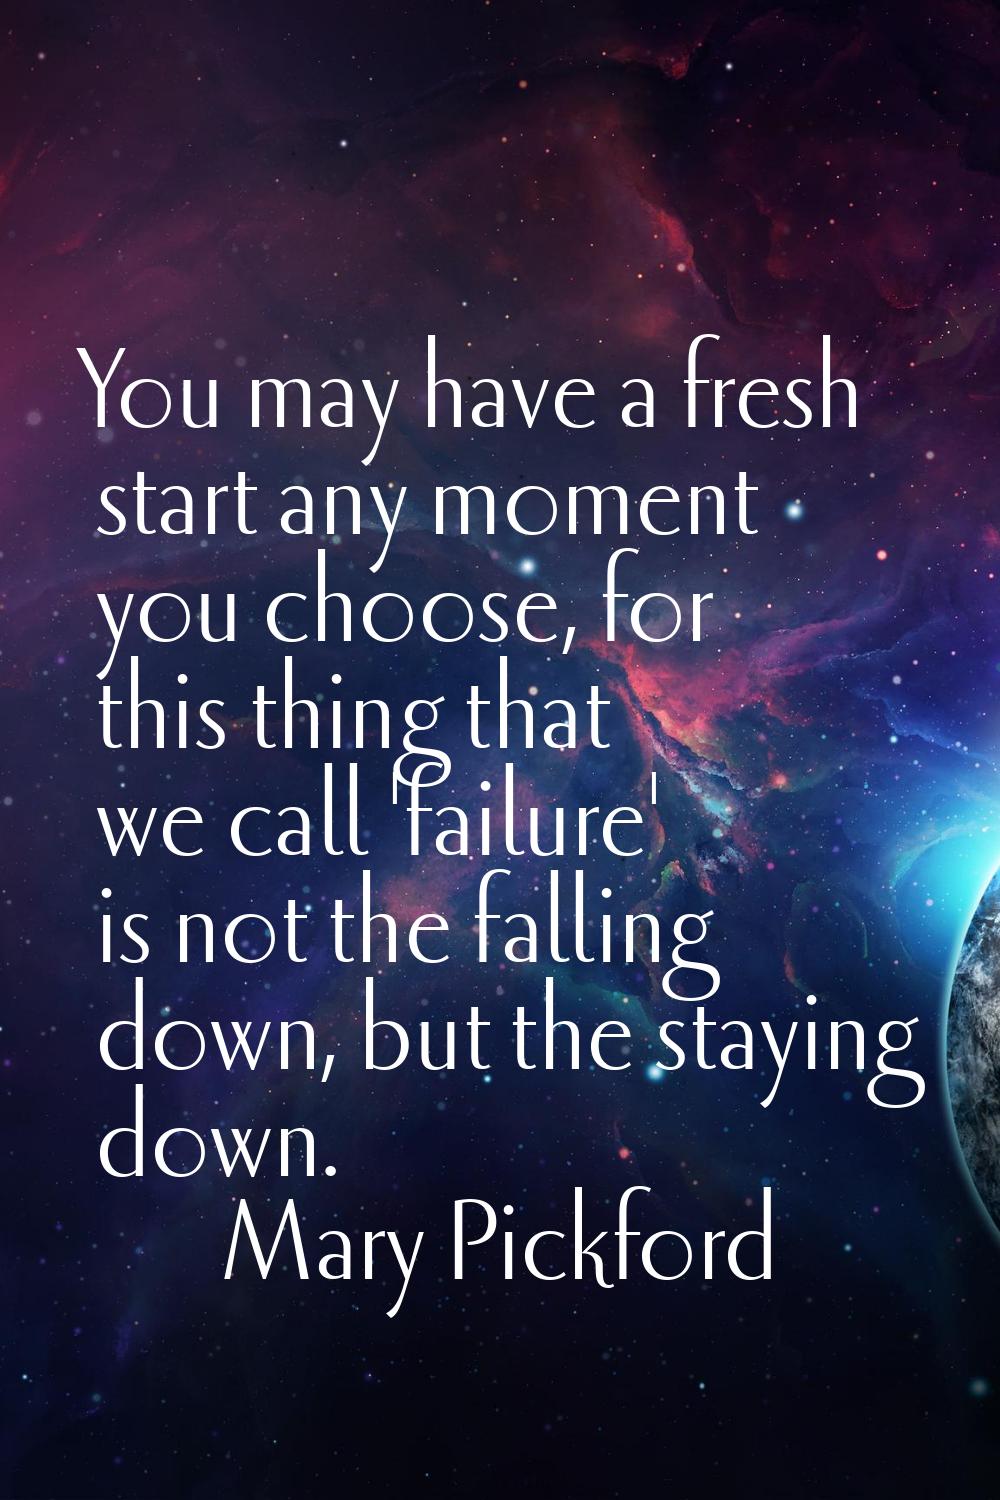 You may have a fresh start any moment you choose, for this thing that we call 'failure' is not the 